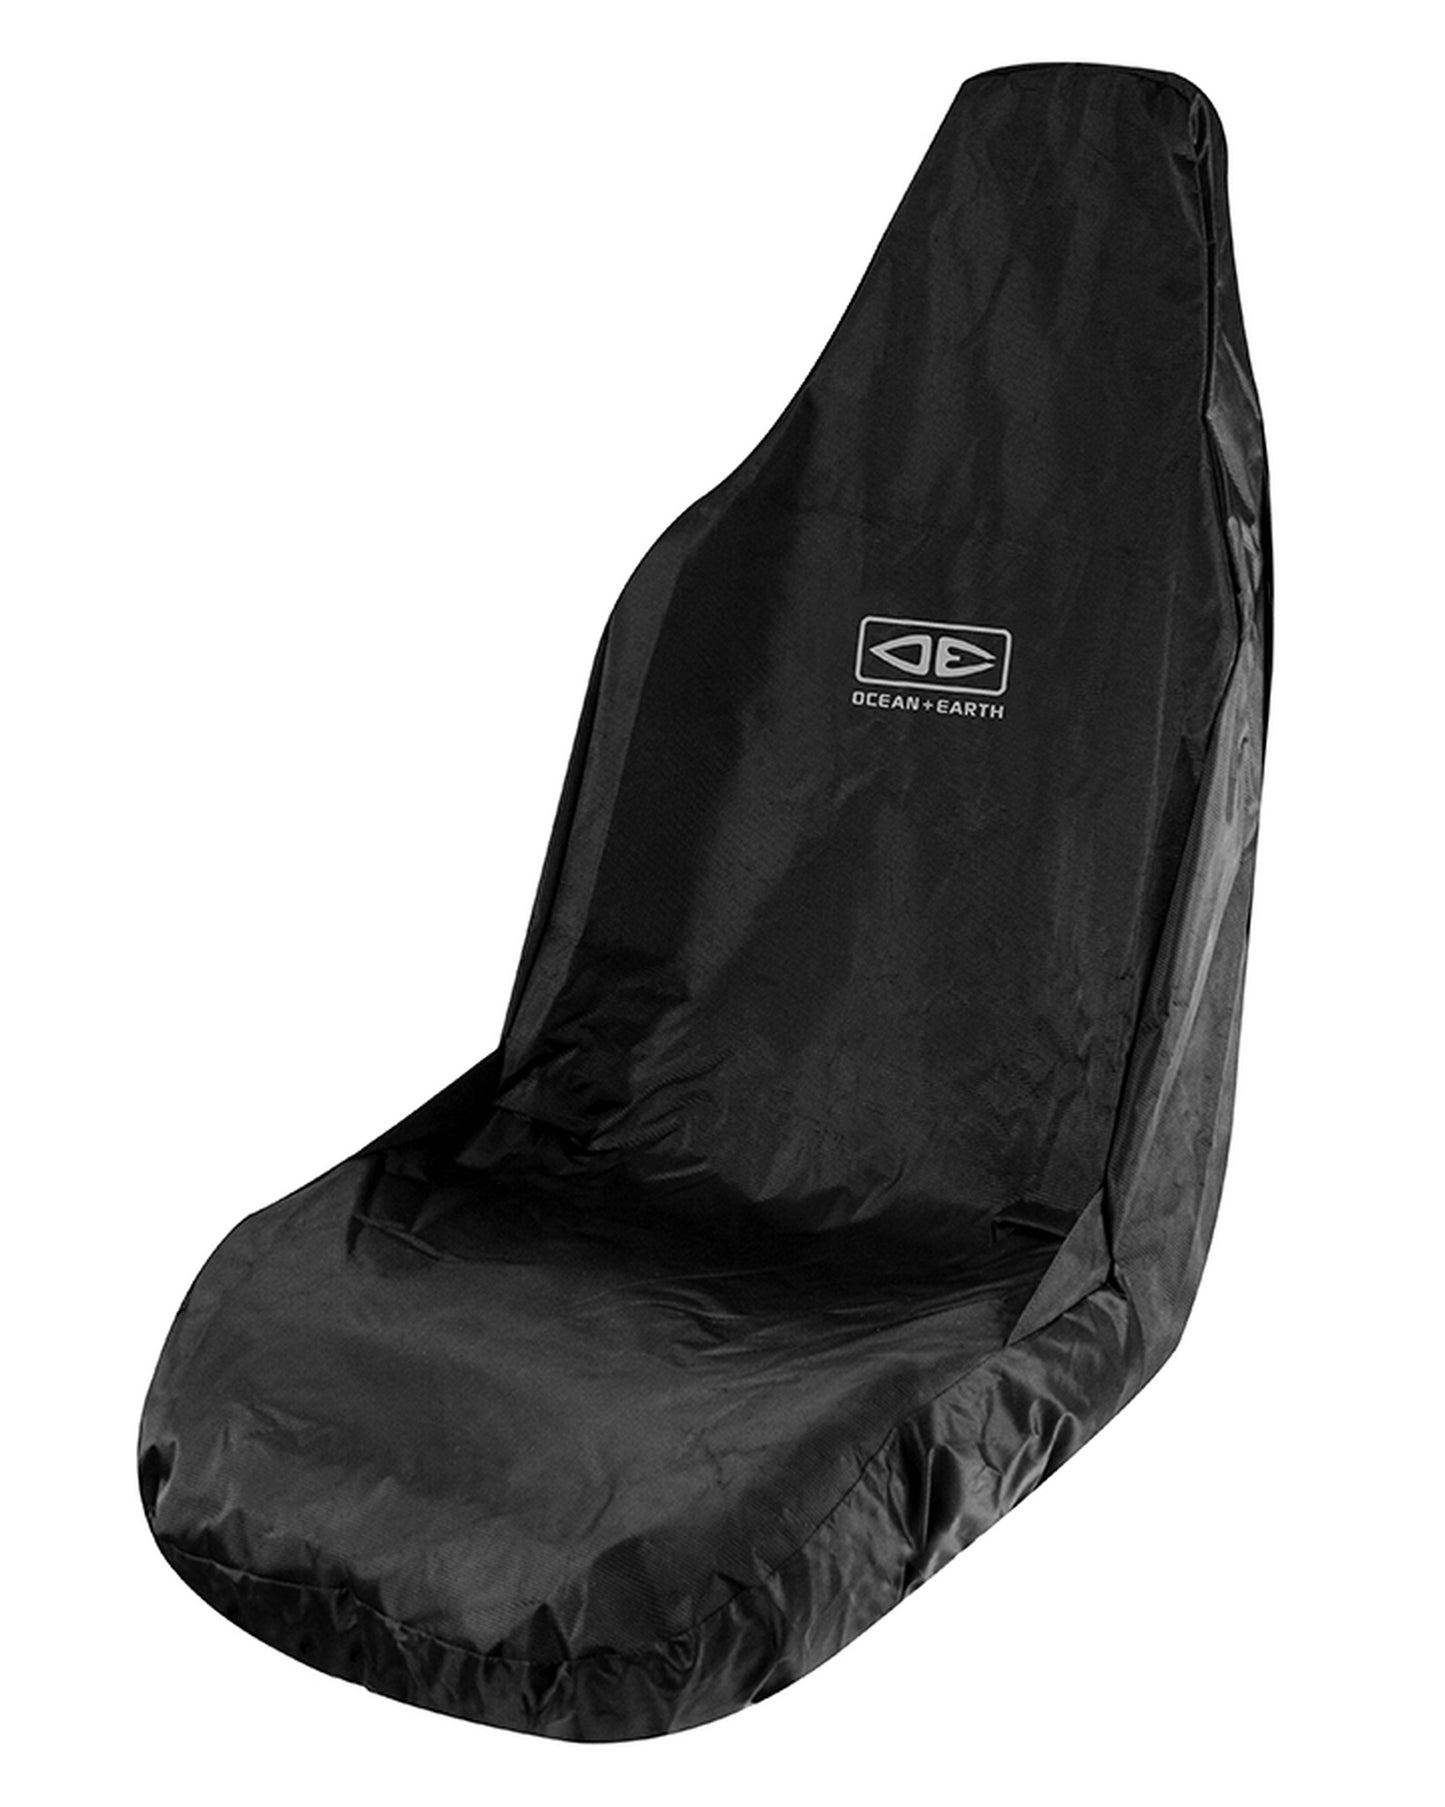 Dry Seat Waterproof Car Seat Cover - essential surf and skate